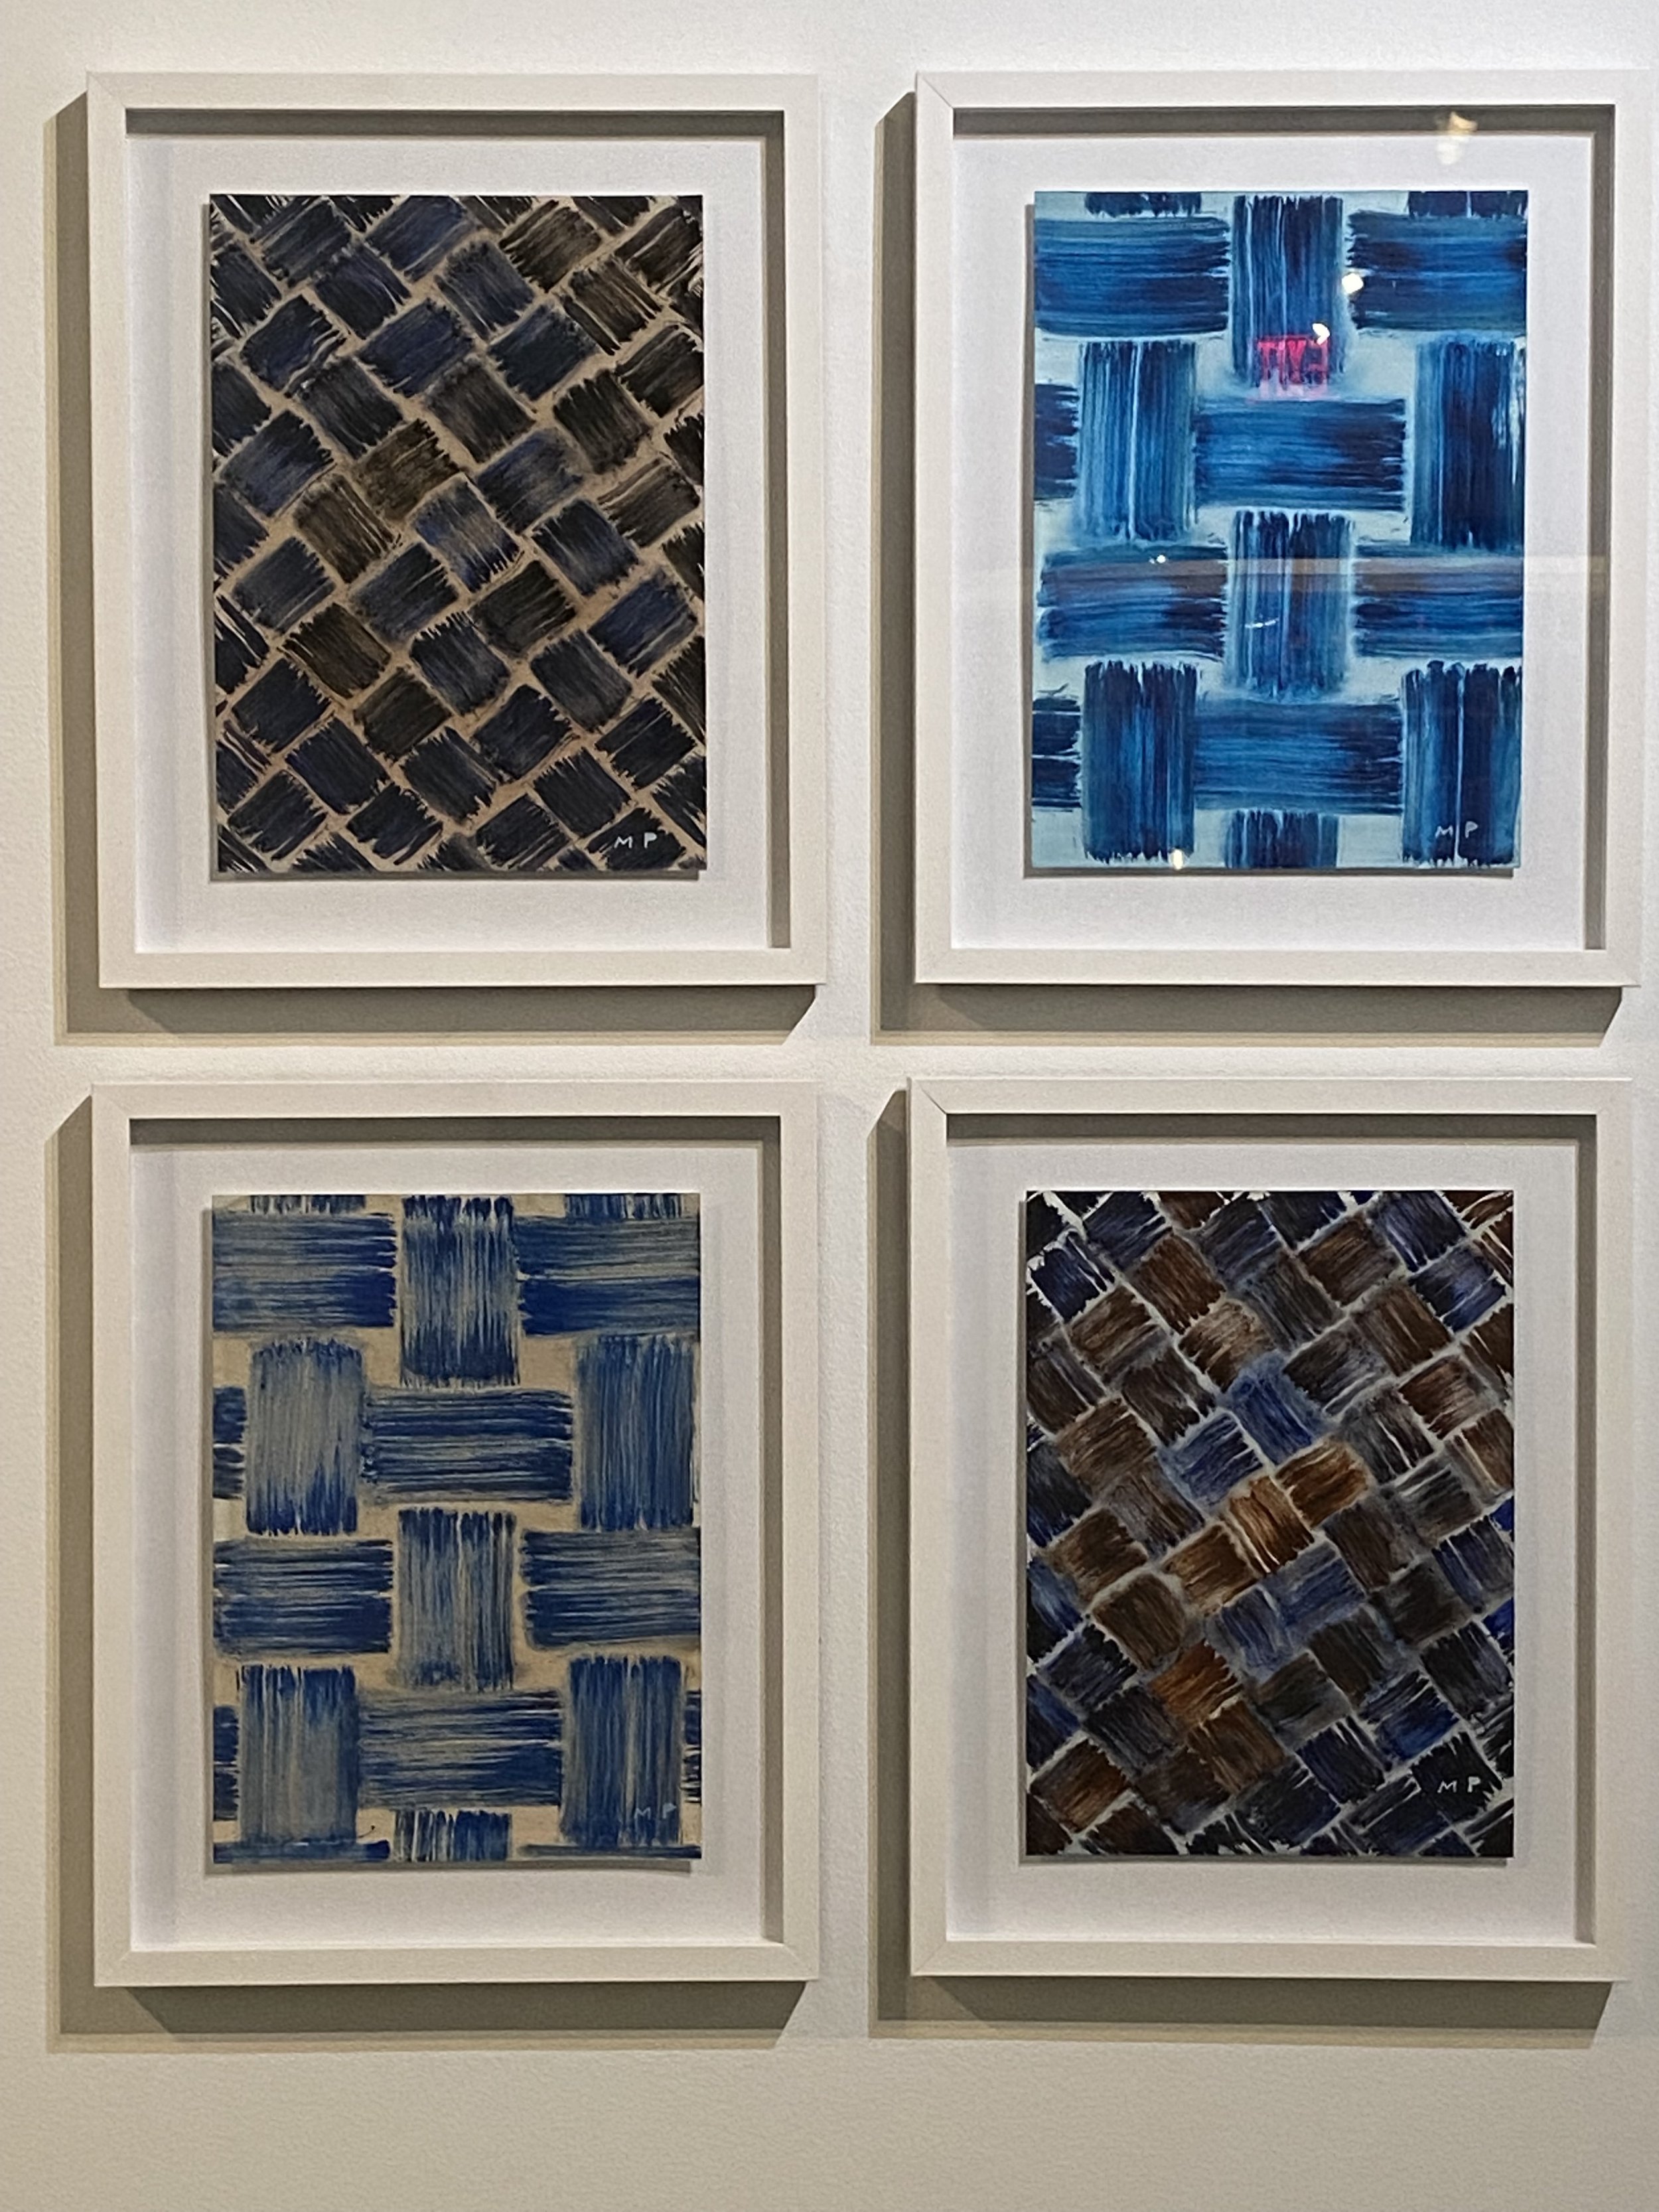 Four Works on Paper from the Woven Series.